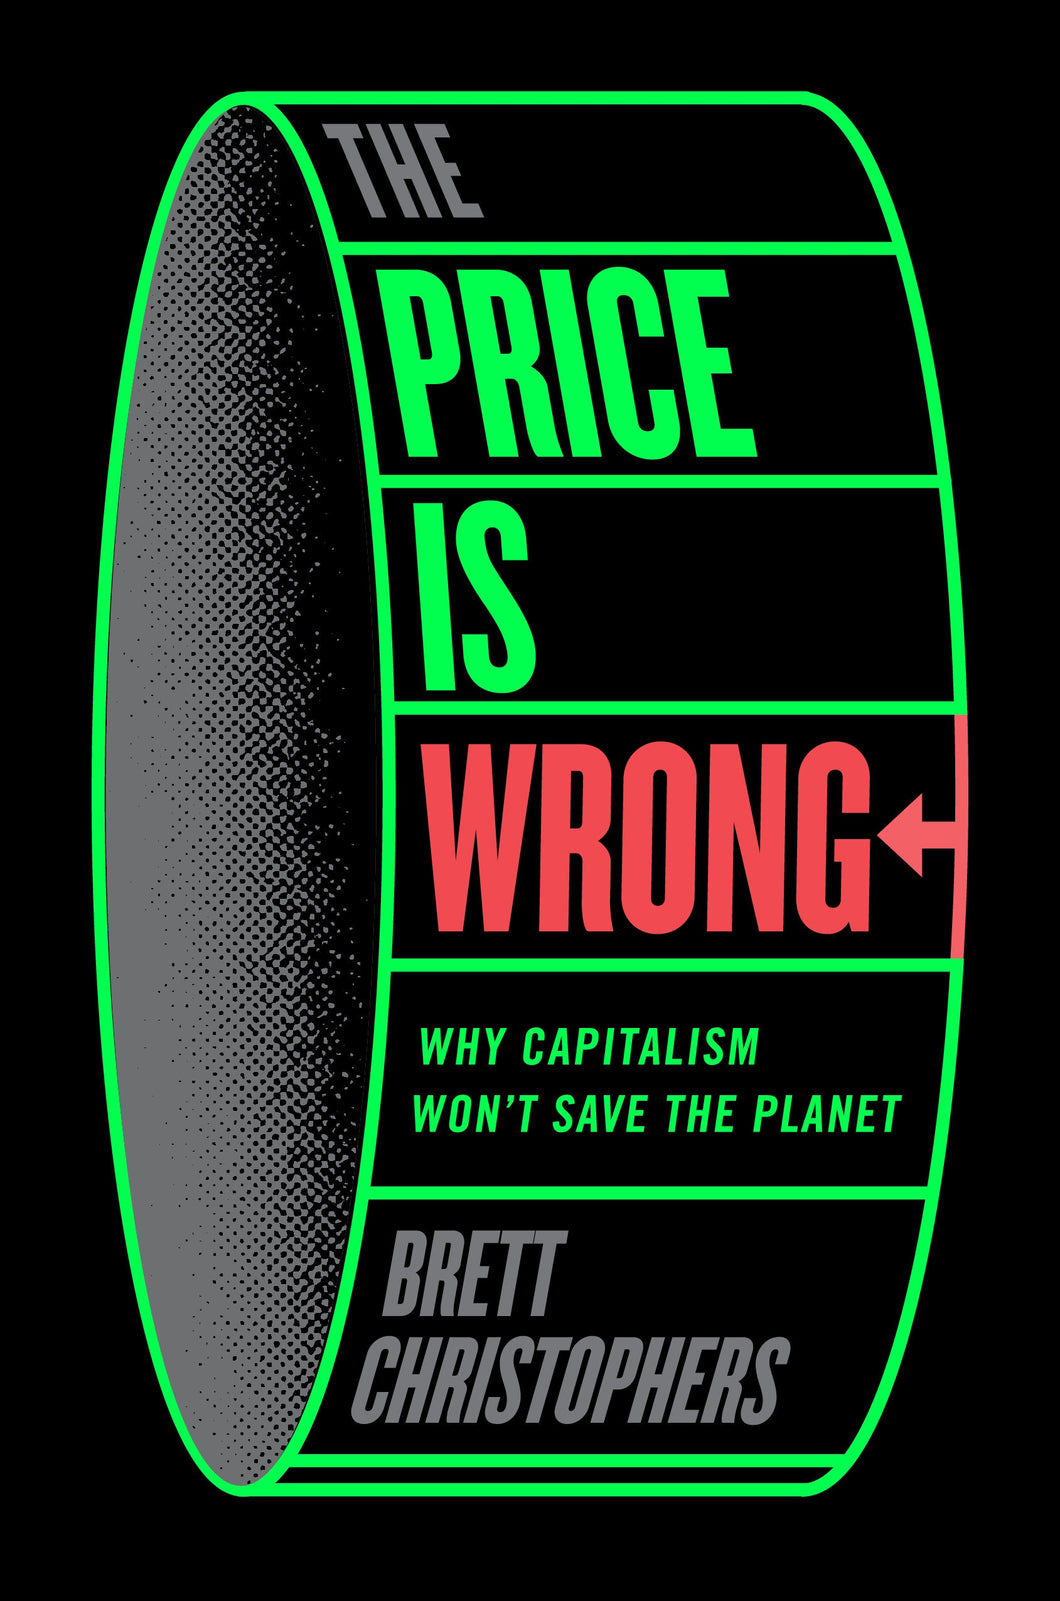 The Price is Wrong : Why Capitalism Won't Save the Planet